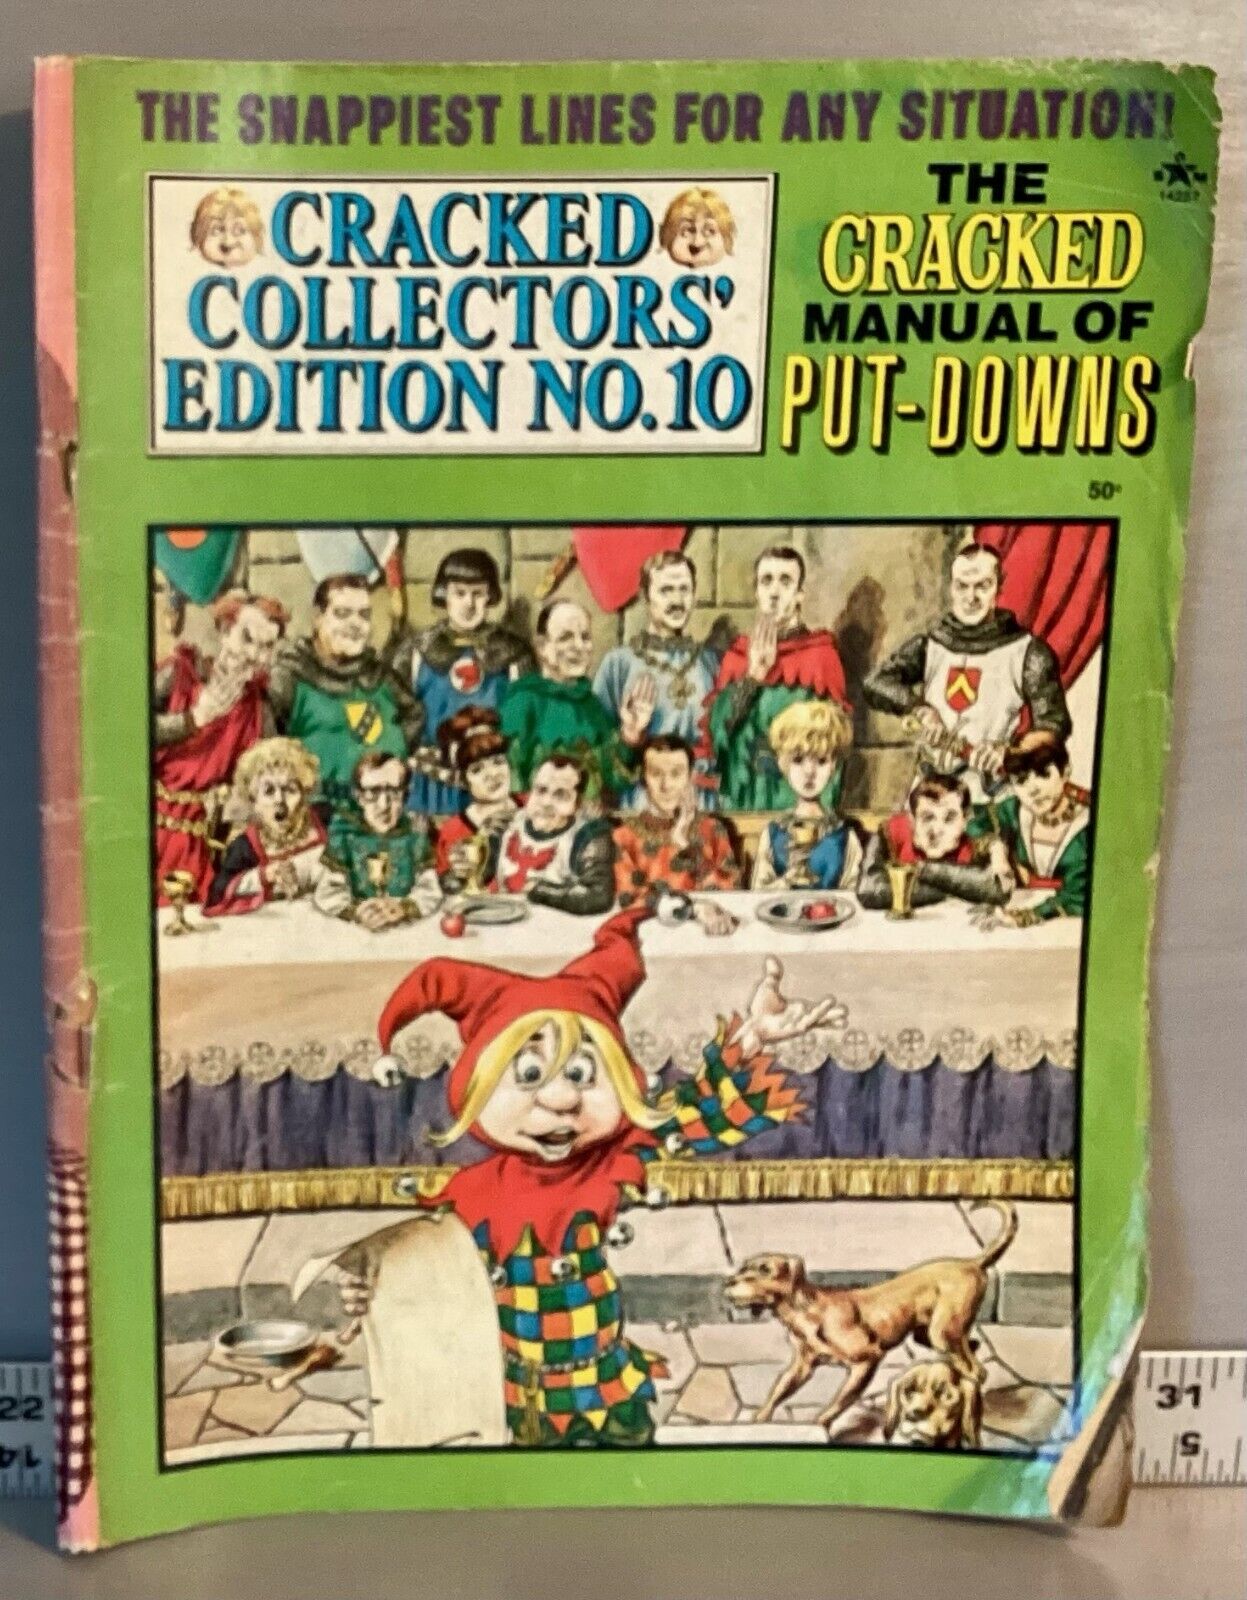 Cracked Collector's Edition #10